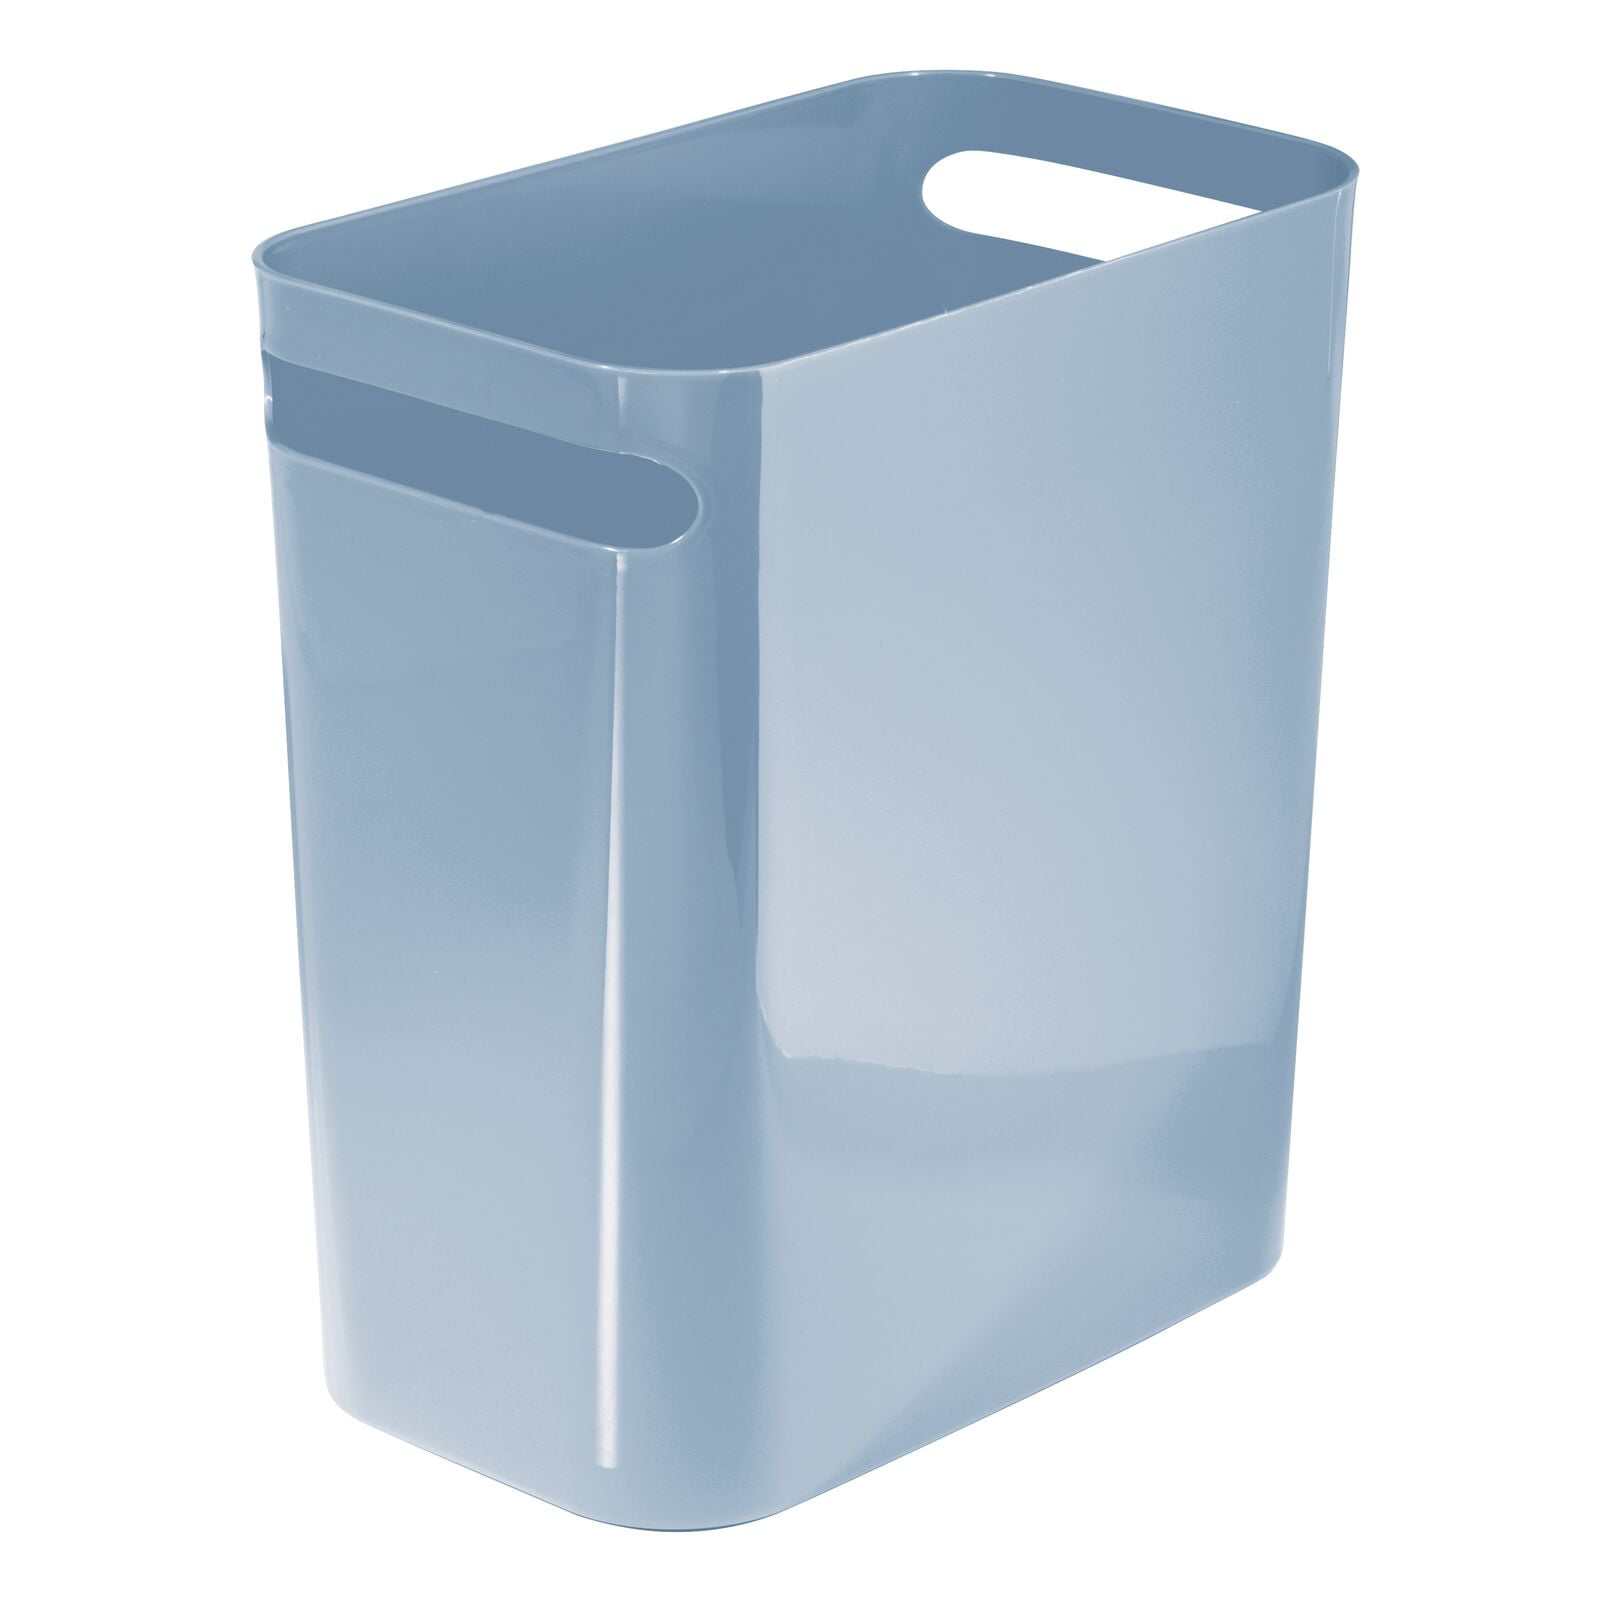 25 cm Bins for Recycling and More Office and Kitchen Waste Paper Bin for Bathroom Slate Grey Elegant Design in Plastic with a Slender Oval Shape mDesign Narrow Waste Bin 